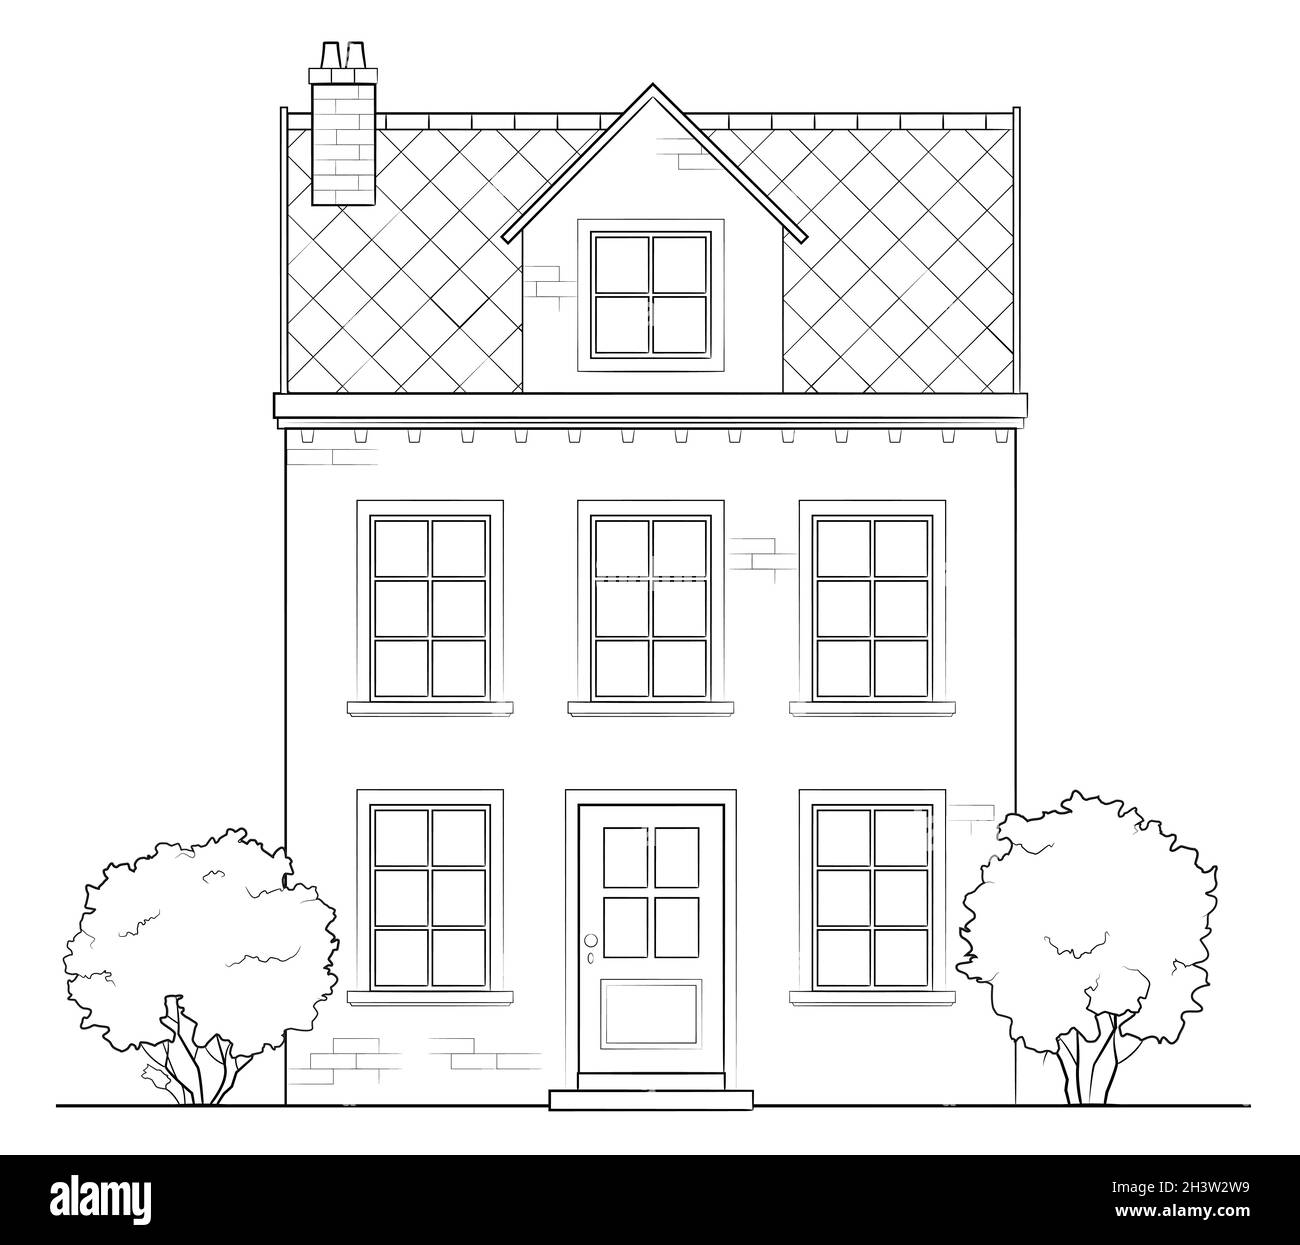 Drawing of classic family house - black and white illustration ...